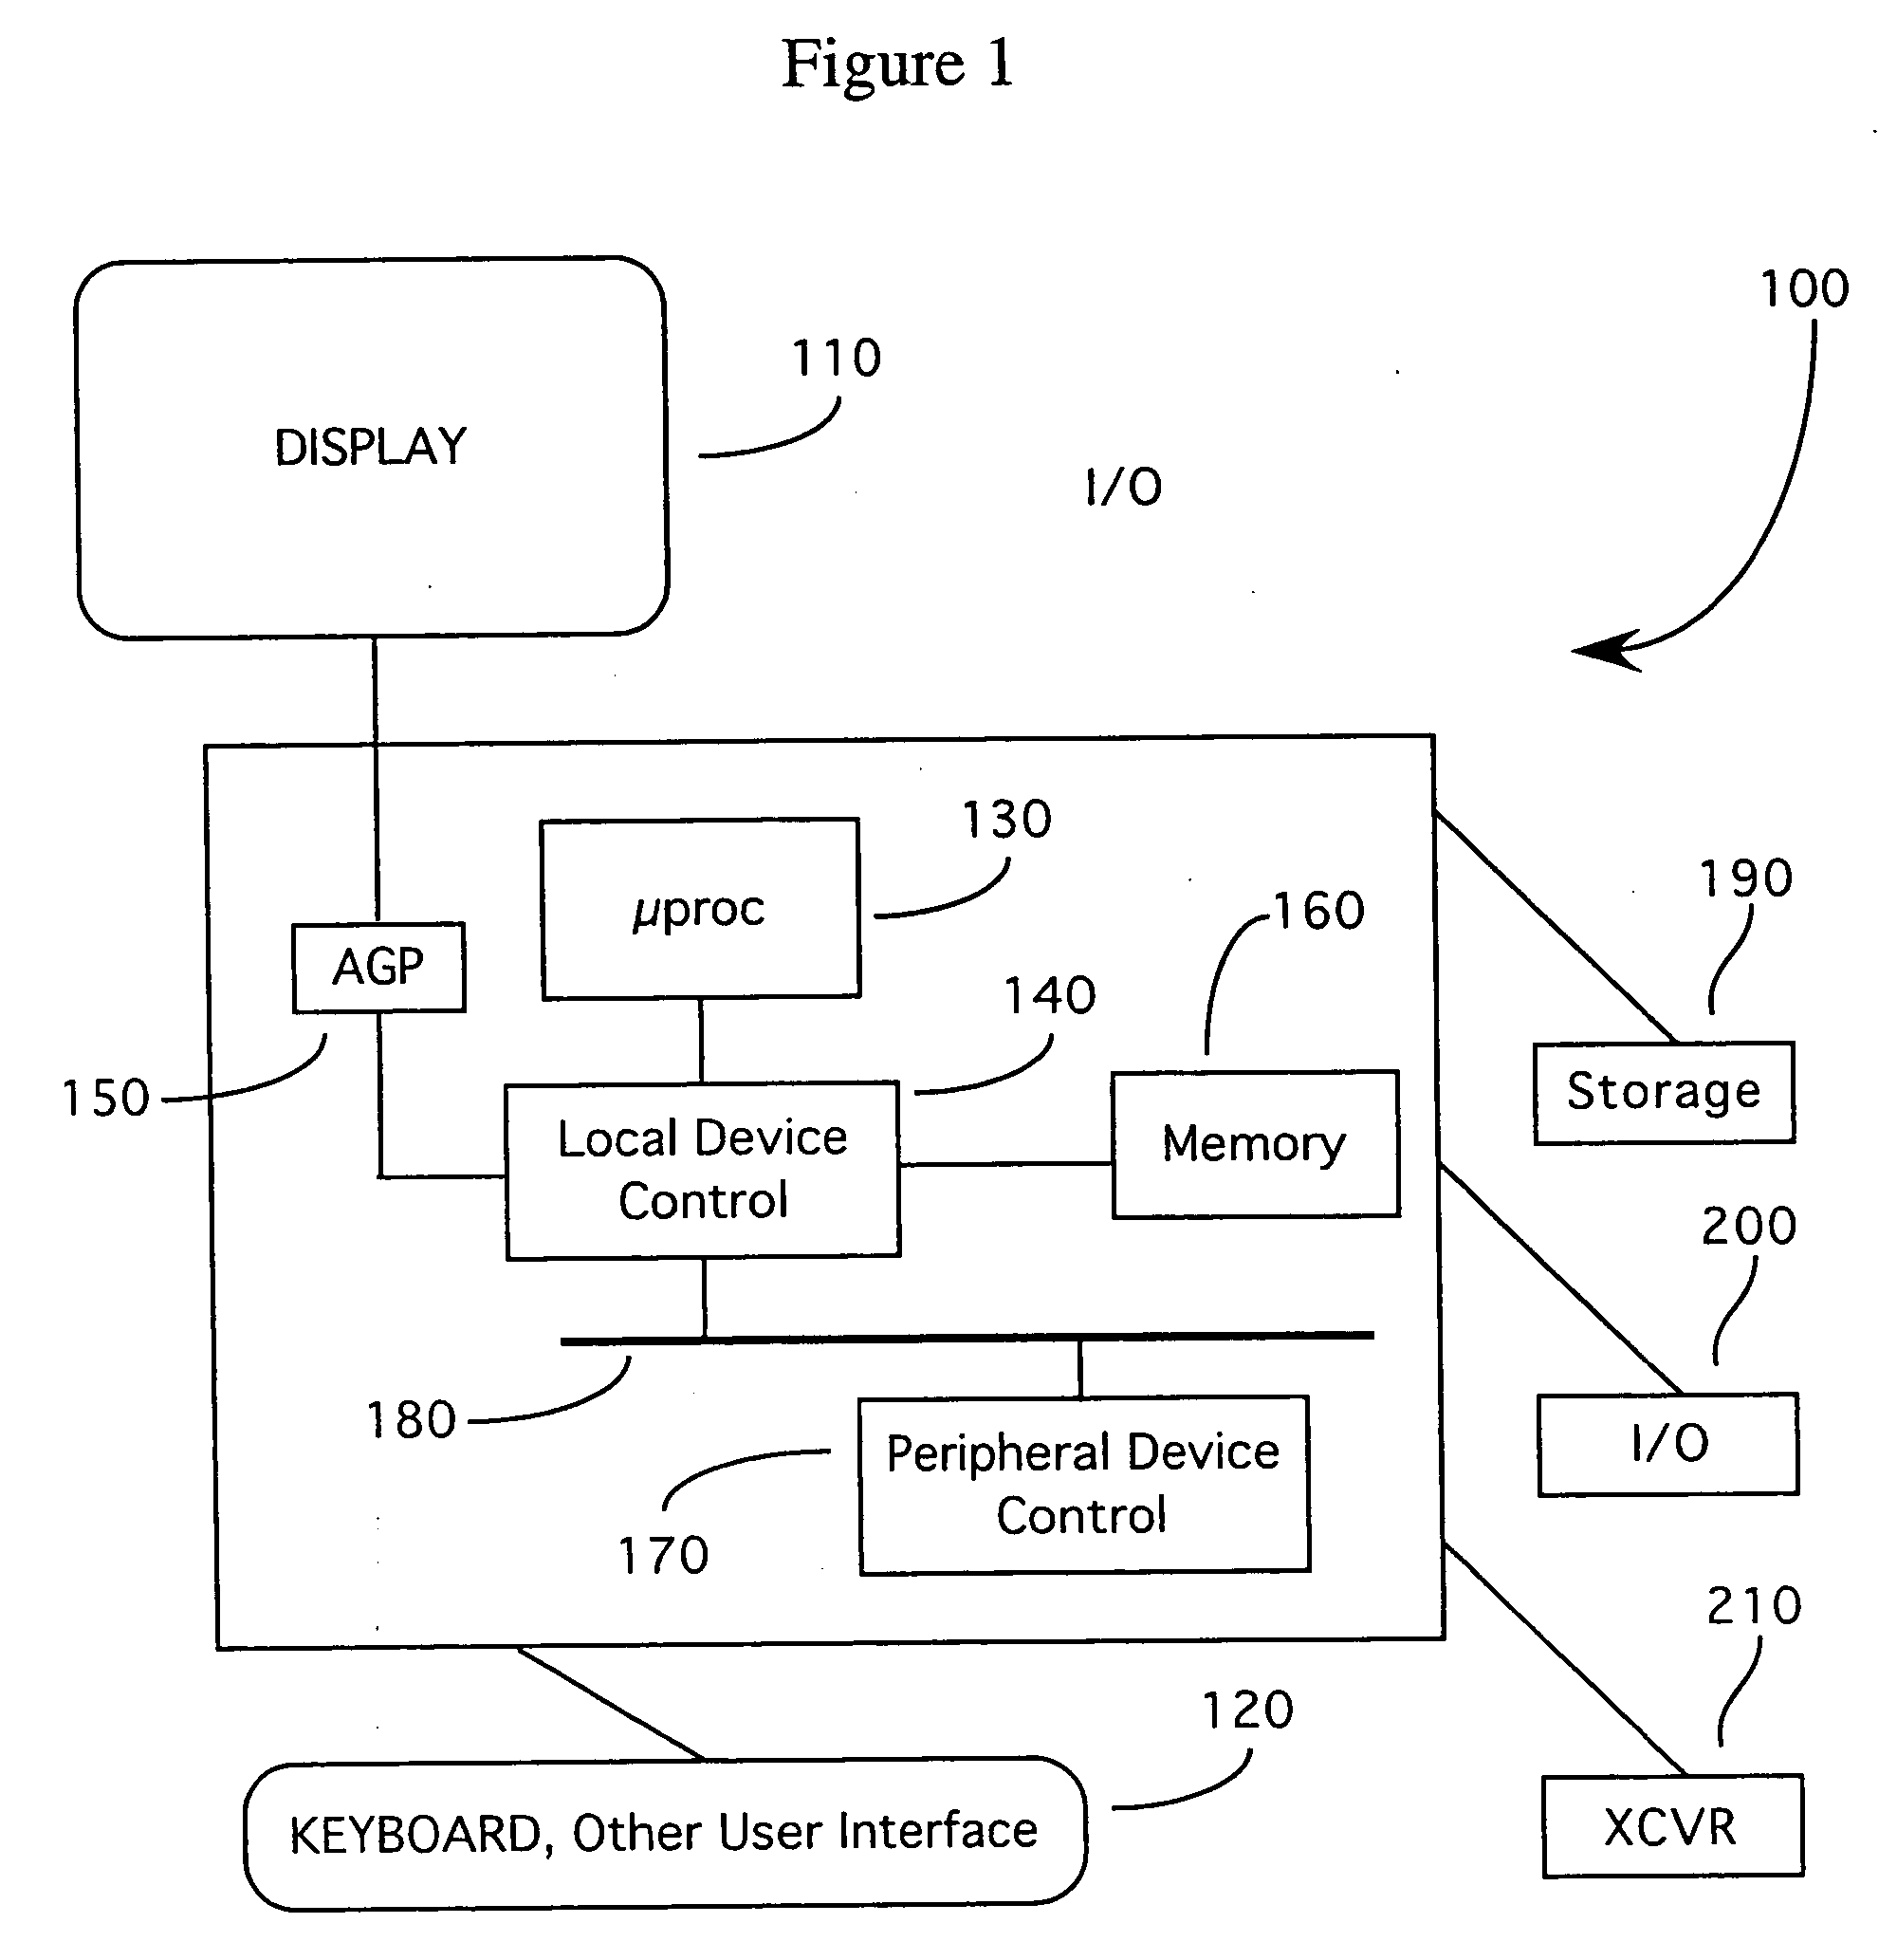 System for geometrically accurate compression and decompression